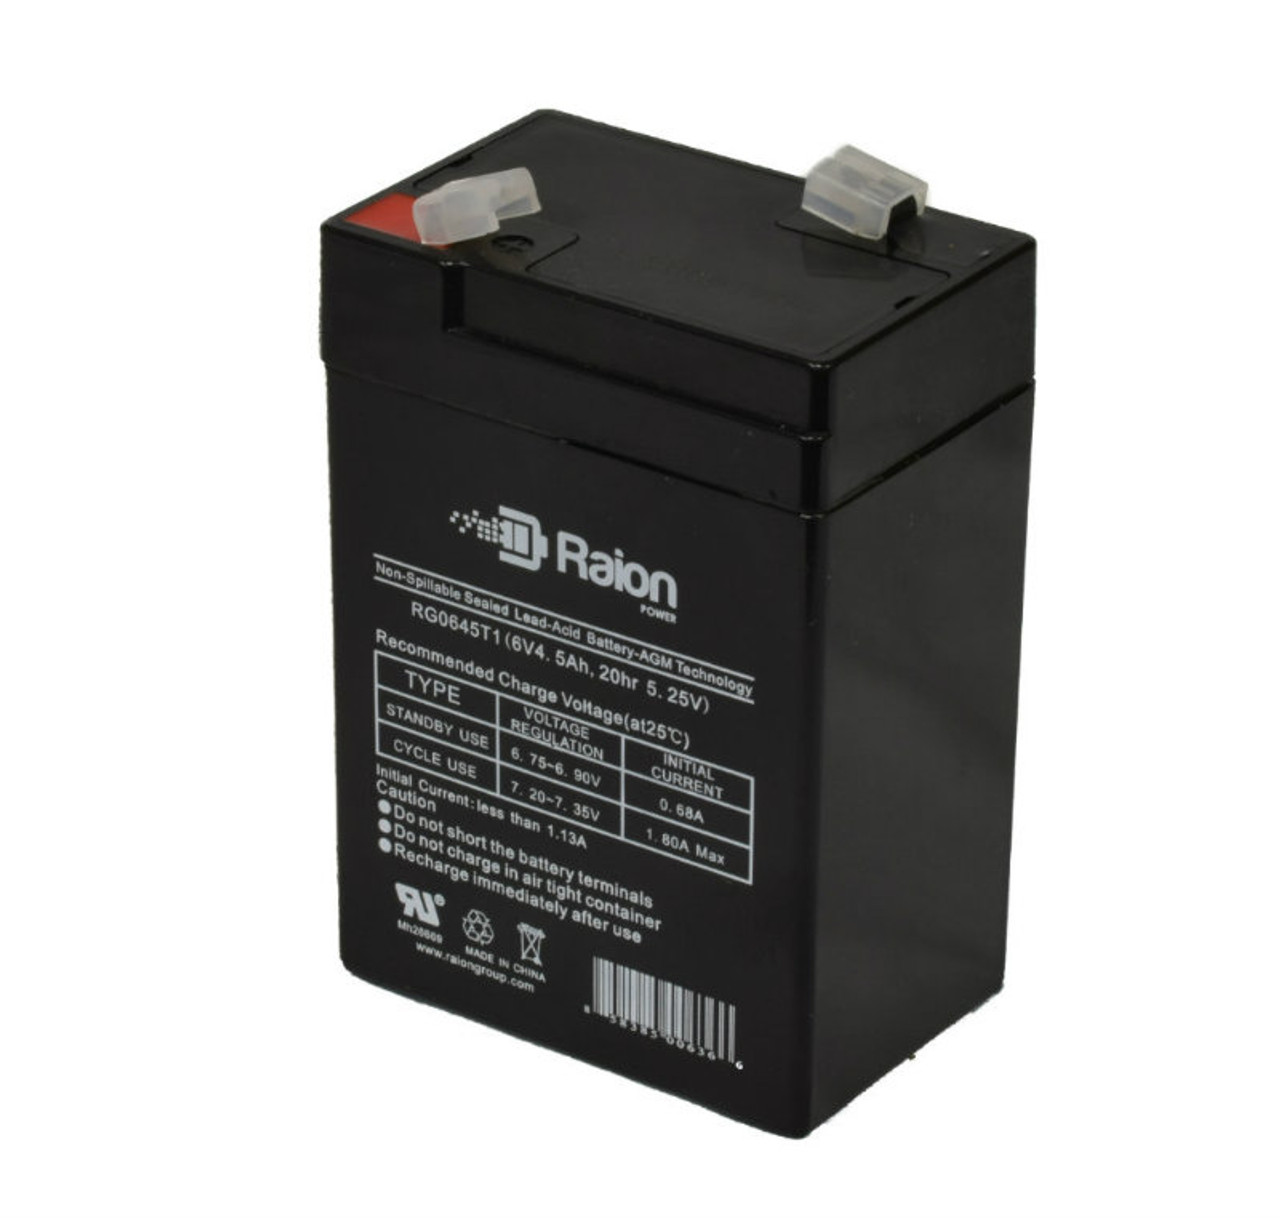 Raion Power RG0645T1 6V 4.5Ah Replacement Battery Cartridge for Leadhoo NP4.0-6